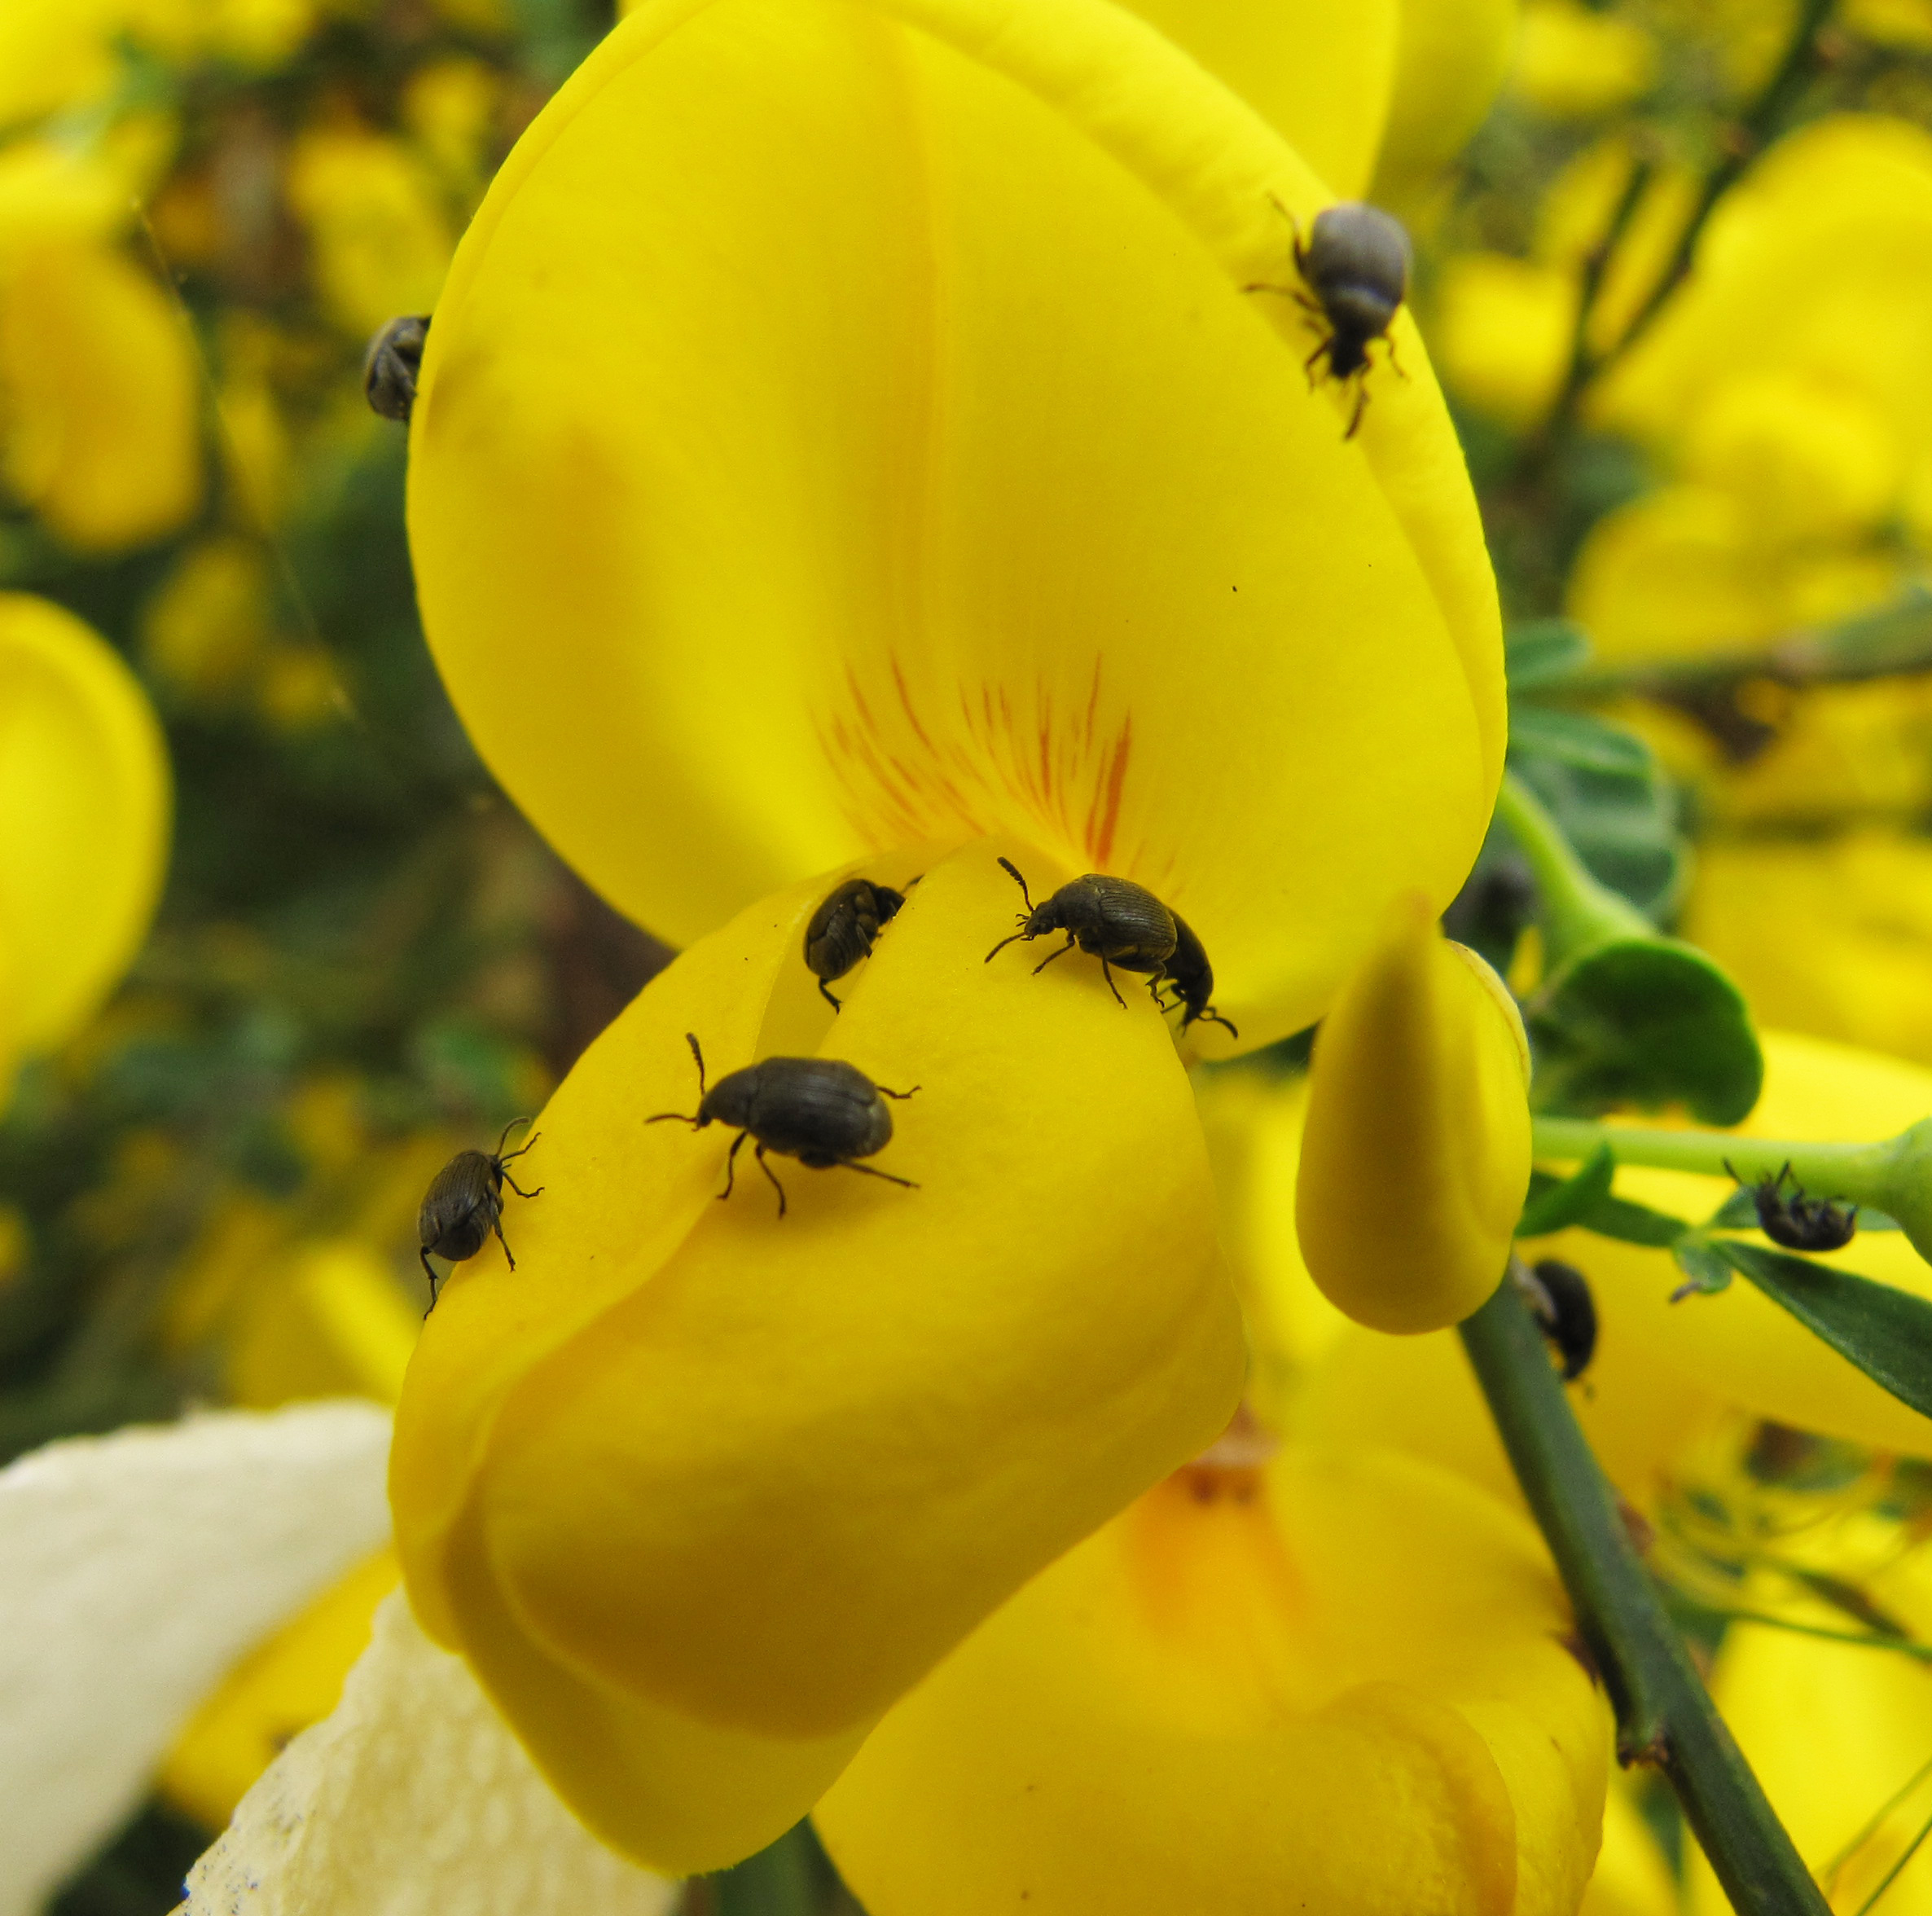 Scotch Broom Beetles could help slow spread of invasive plant